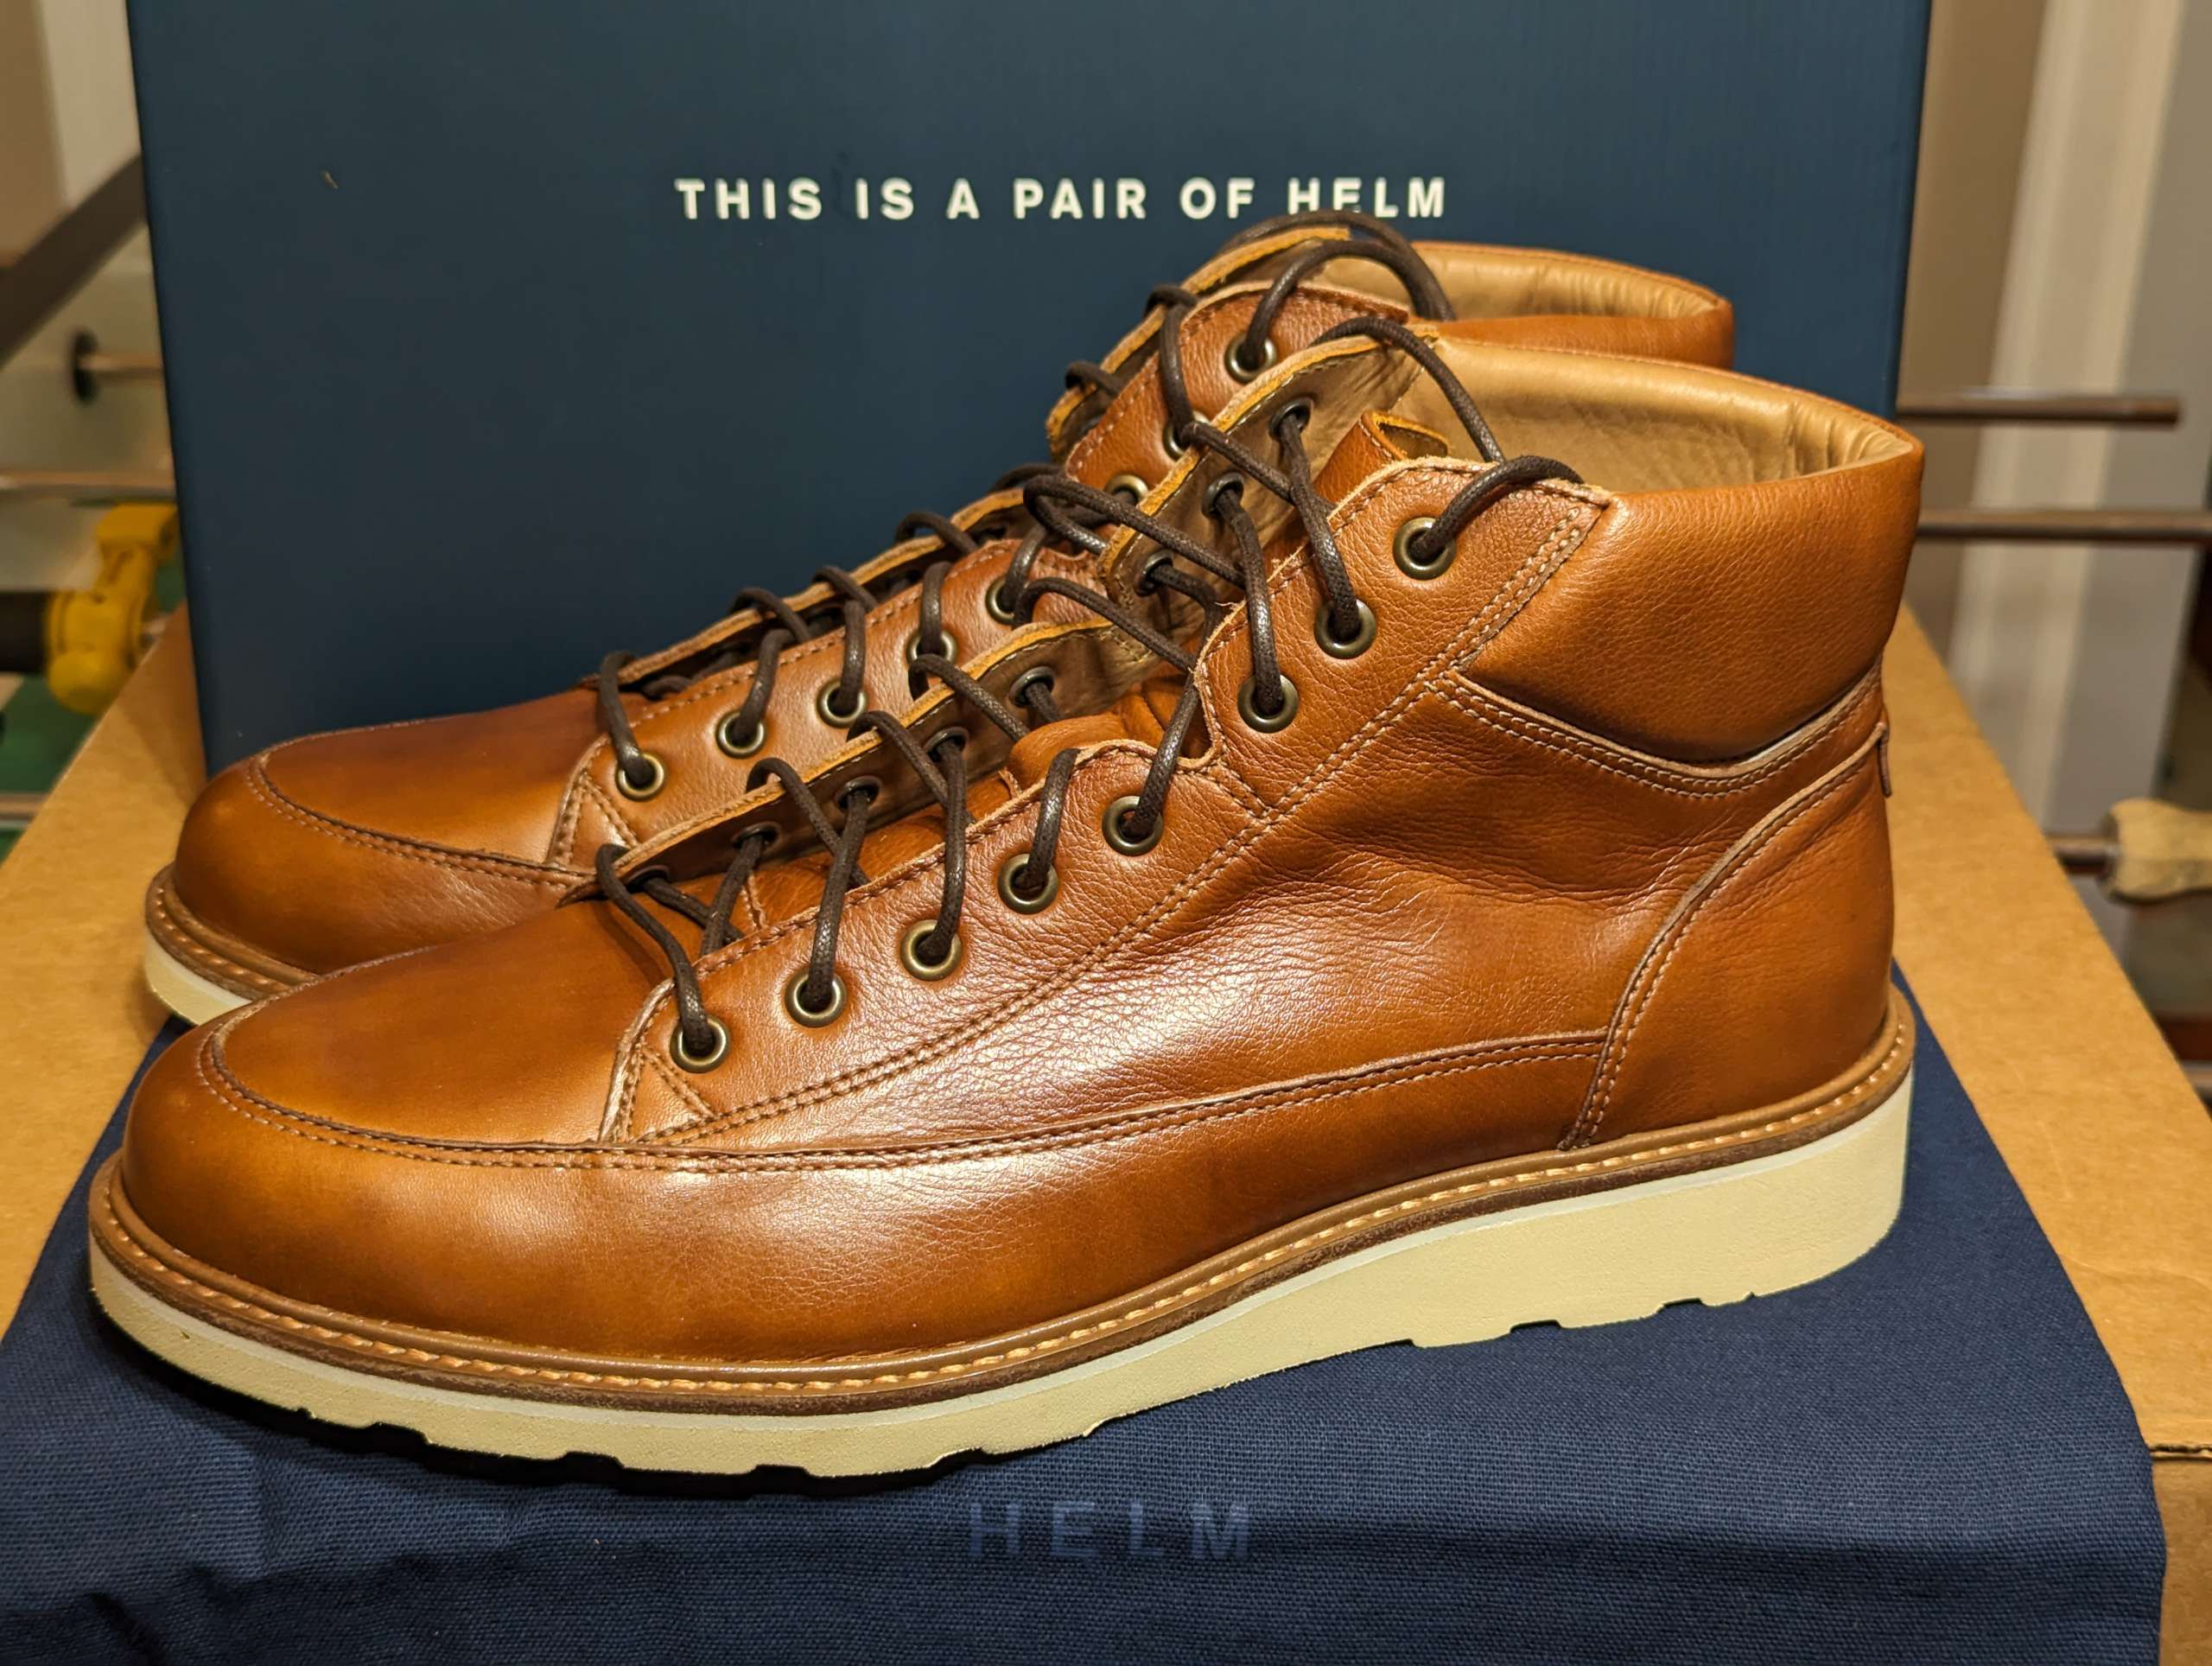 Helm Calistoga Whiskey Boots review - handmade quality, class, and ...